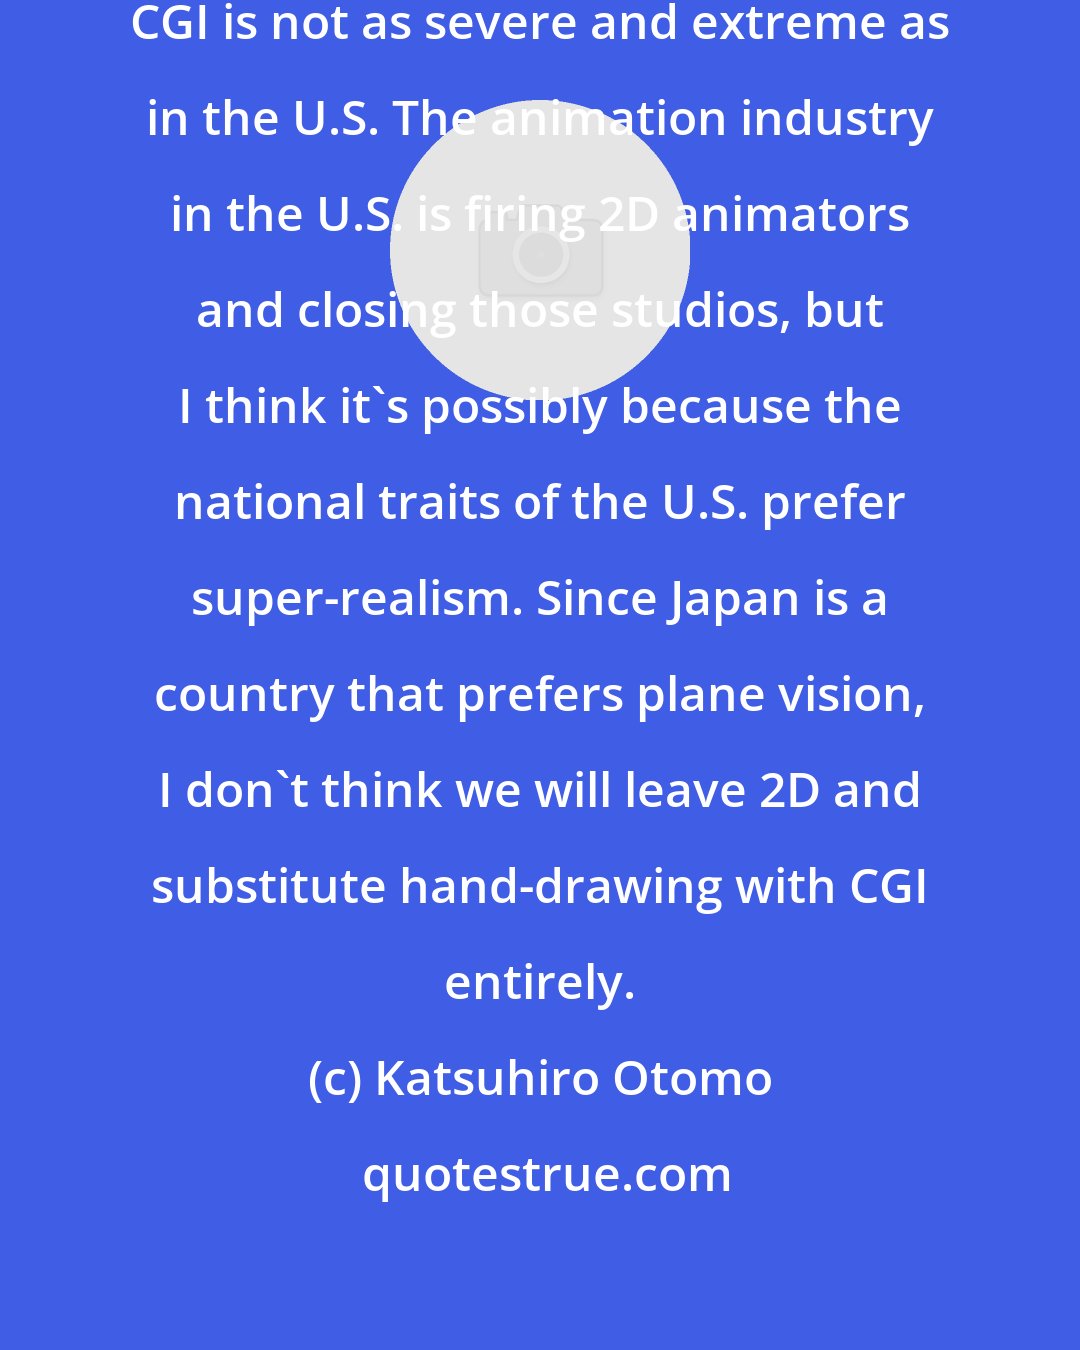 Katsuhiro Otomo: The industry in Japan moving toward CGI is not as severe and extreme as in the U.S. The animation industry in the U.S. is firing 2D animators and closing those studios, but I think it's possibly because the national traits of the U.S. prefer super-realism. Since Japan is a country that prefers plane vision, I don't think we will leave 2D and substitute hand-drawing with CGI entirely.